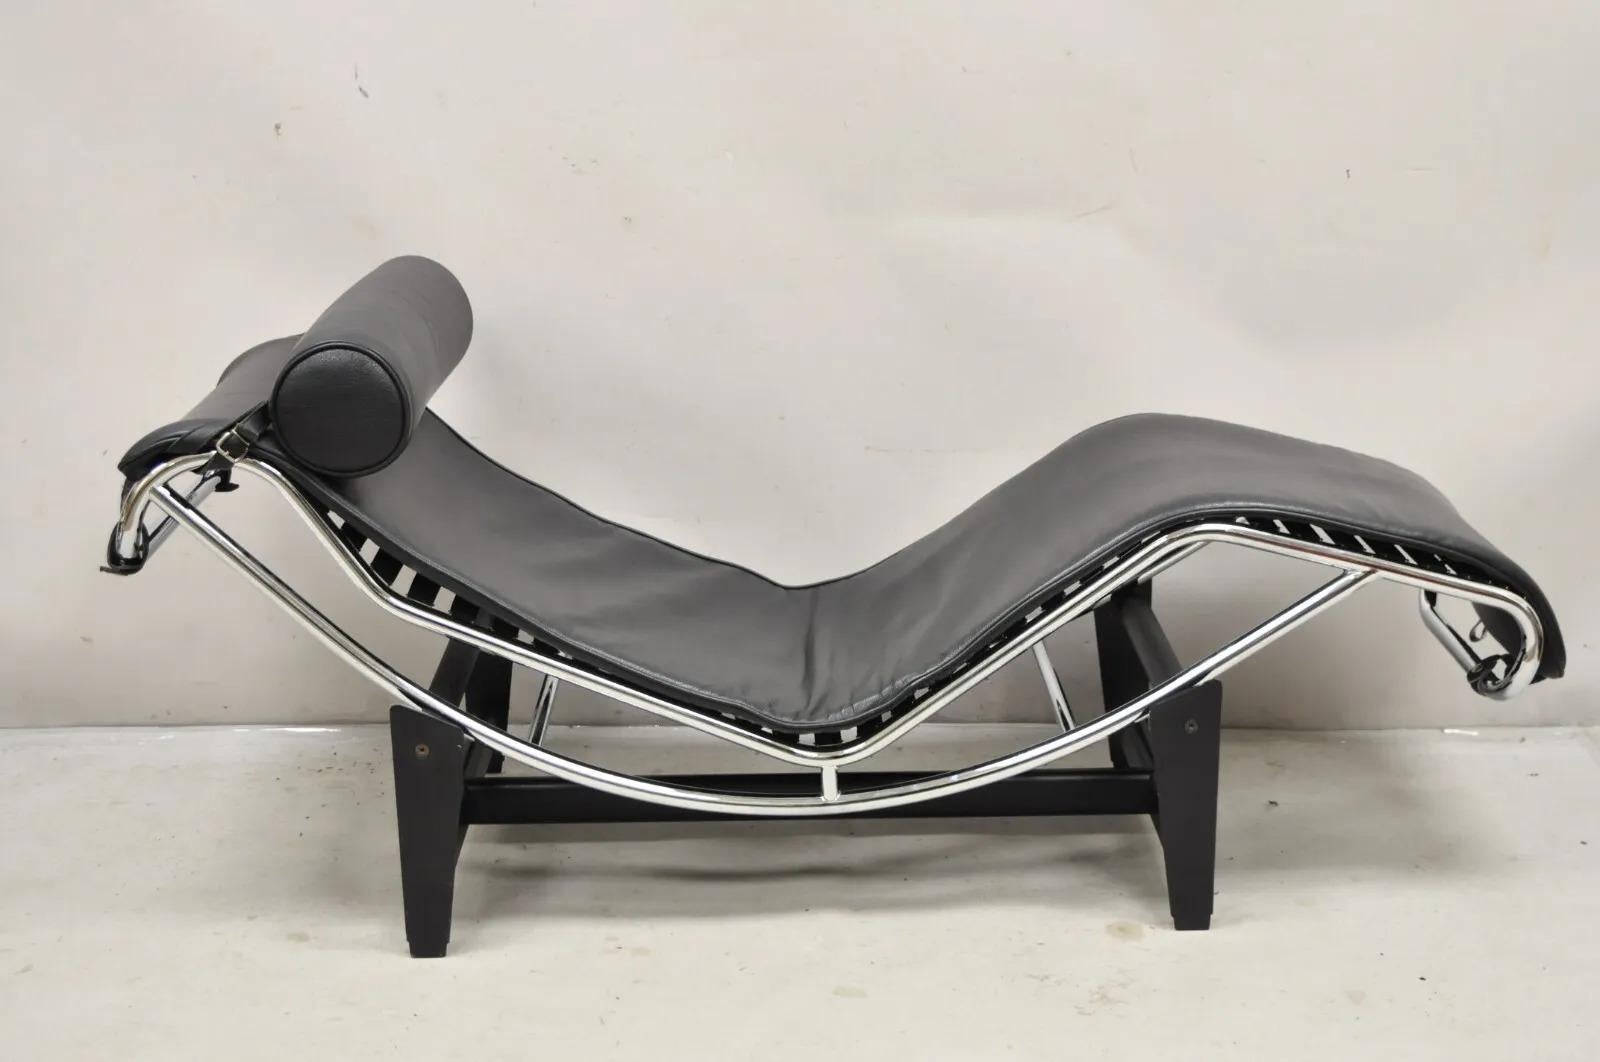 Replica Le Corbusier LC4 Style Chaise Lounge Chair in Black Leather with Adjustable Form. Circa Late 20th Century - Early 21st Century. Measurements: 27